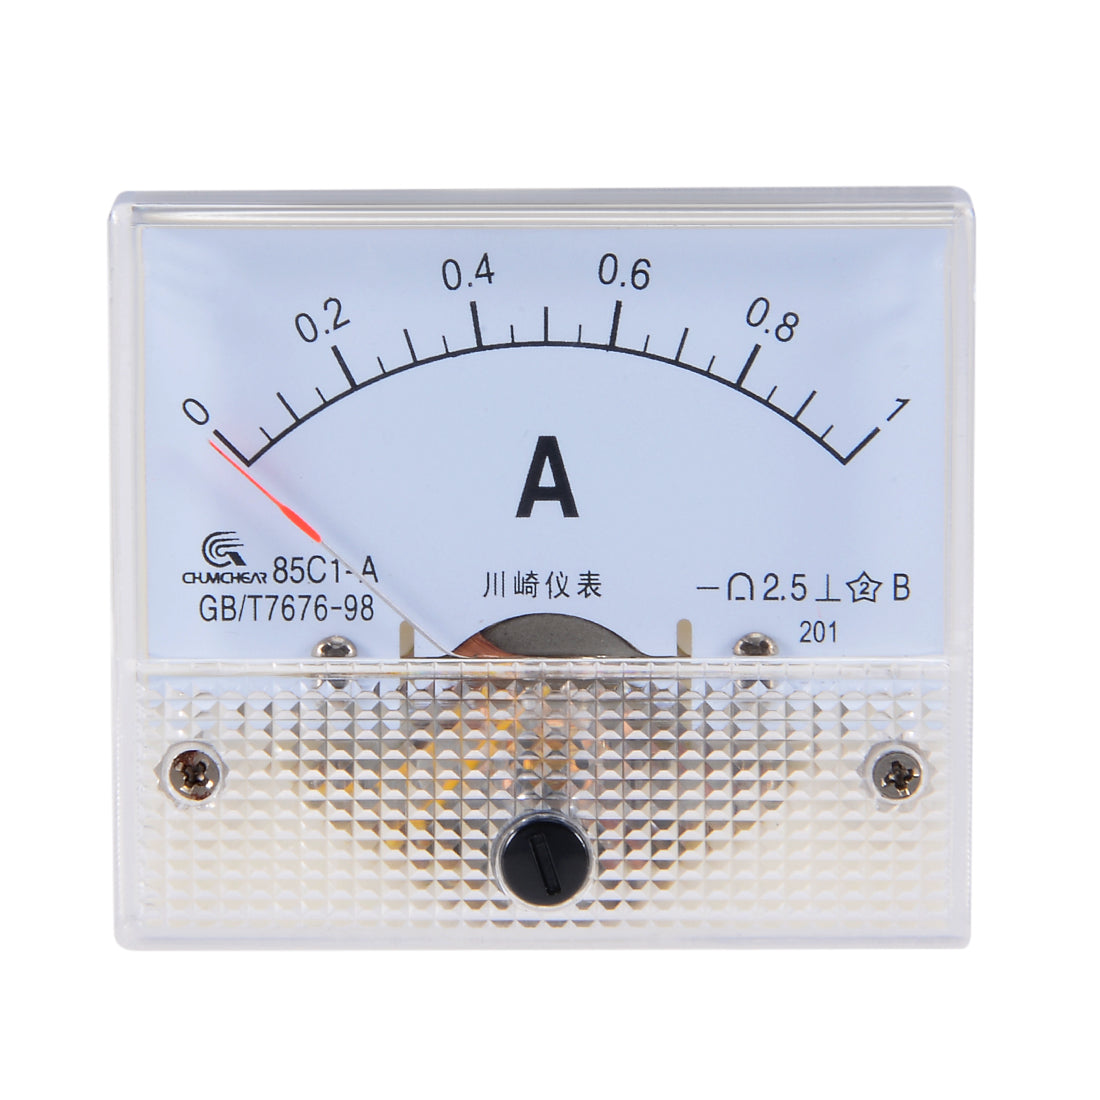 uxcell Uxcell 85C1-A Analog Current Panel Meter DC 1A Ammeter for Circuit Testing Ampere Tester Gauge 1 PCS